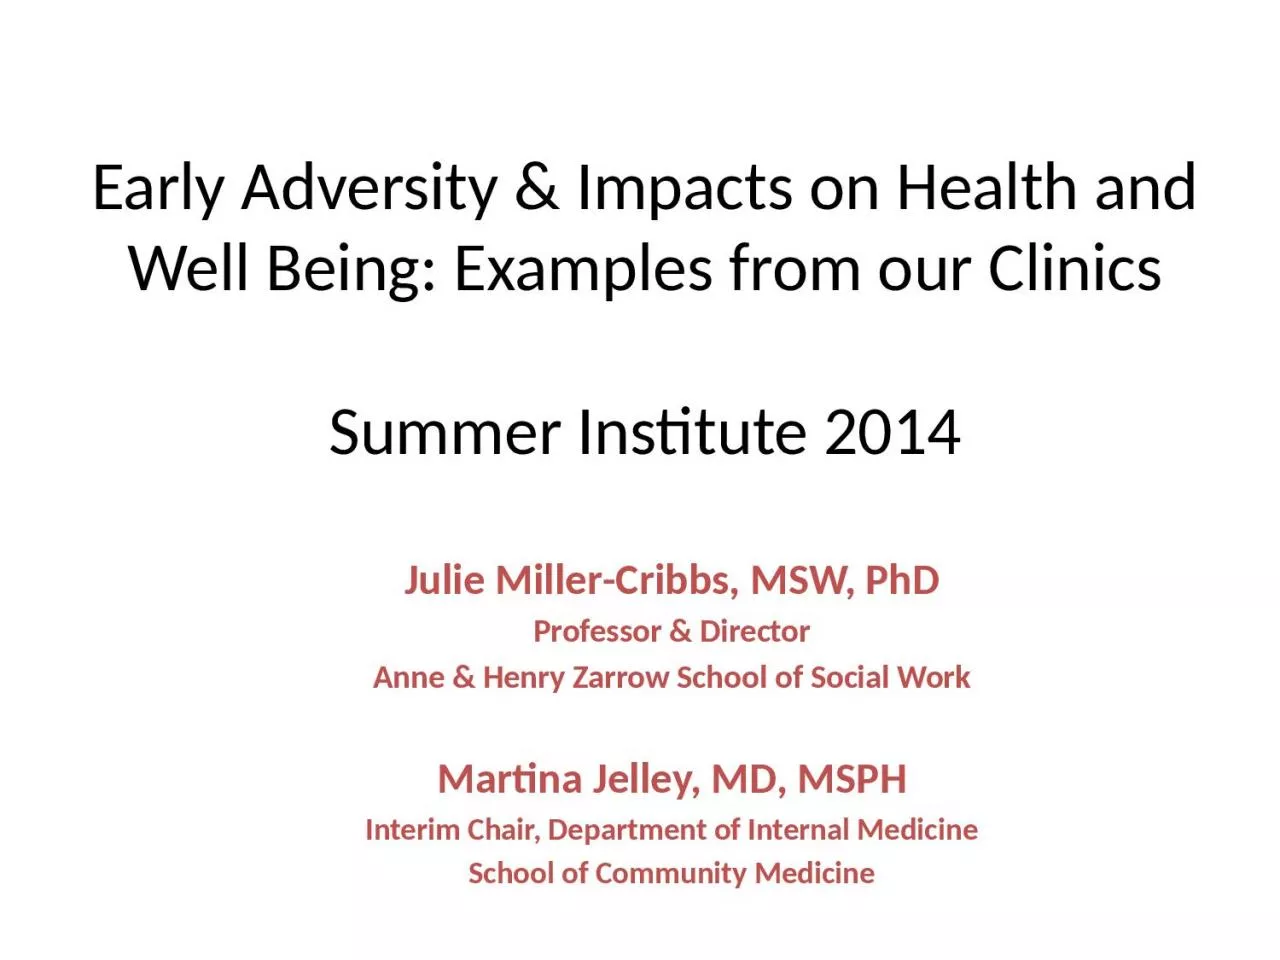 Early Adversity & Impacts on Health and Well Being: Examples from our Clinics